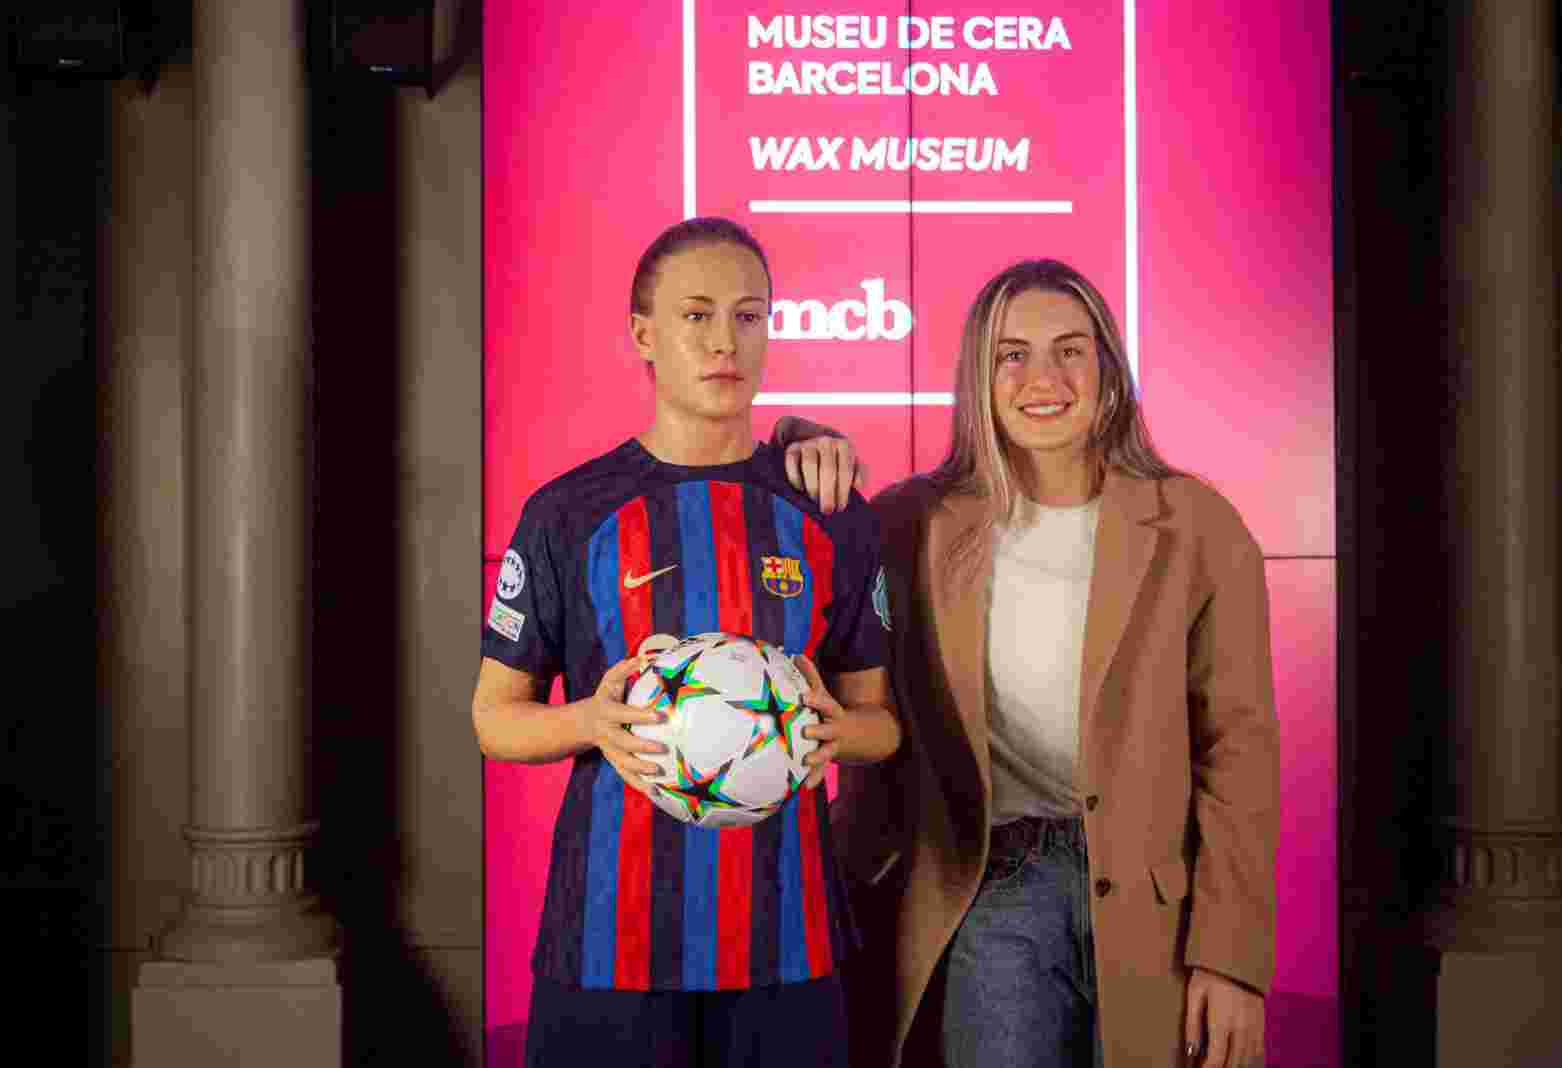 <div>The Barcelona Wax Museum presents the wax figure of Alexia Putellas</div>